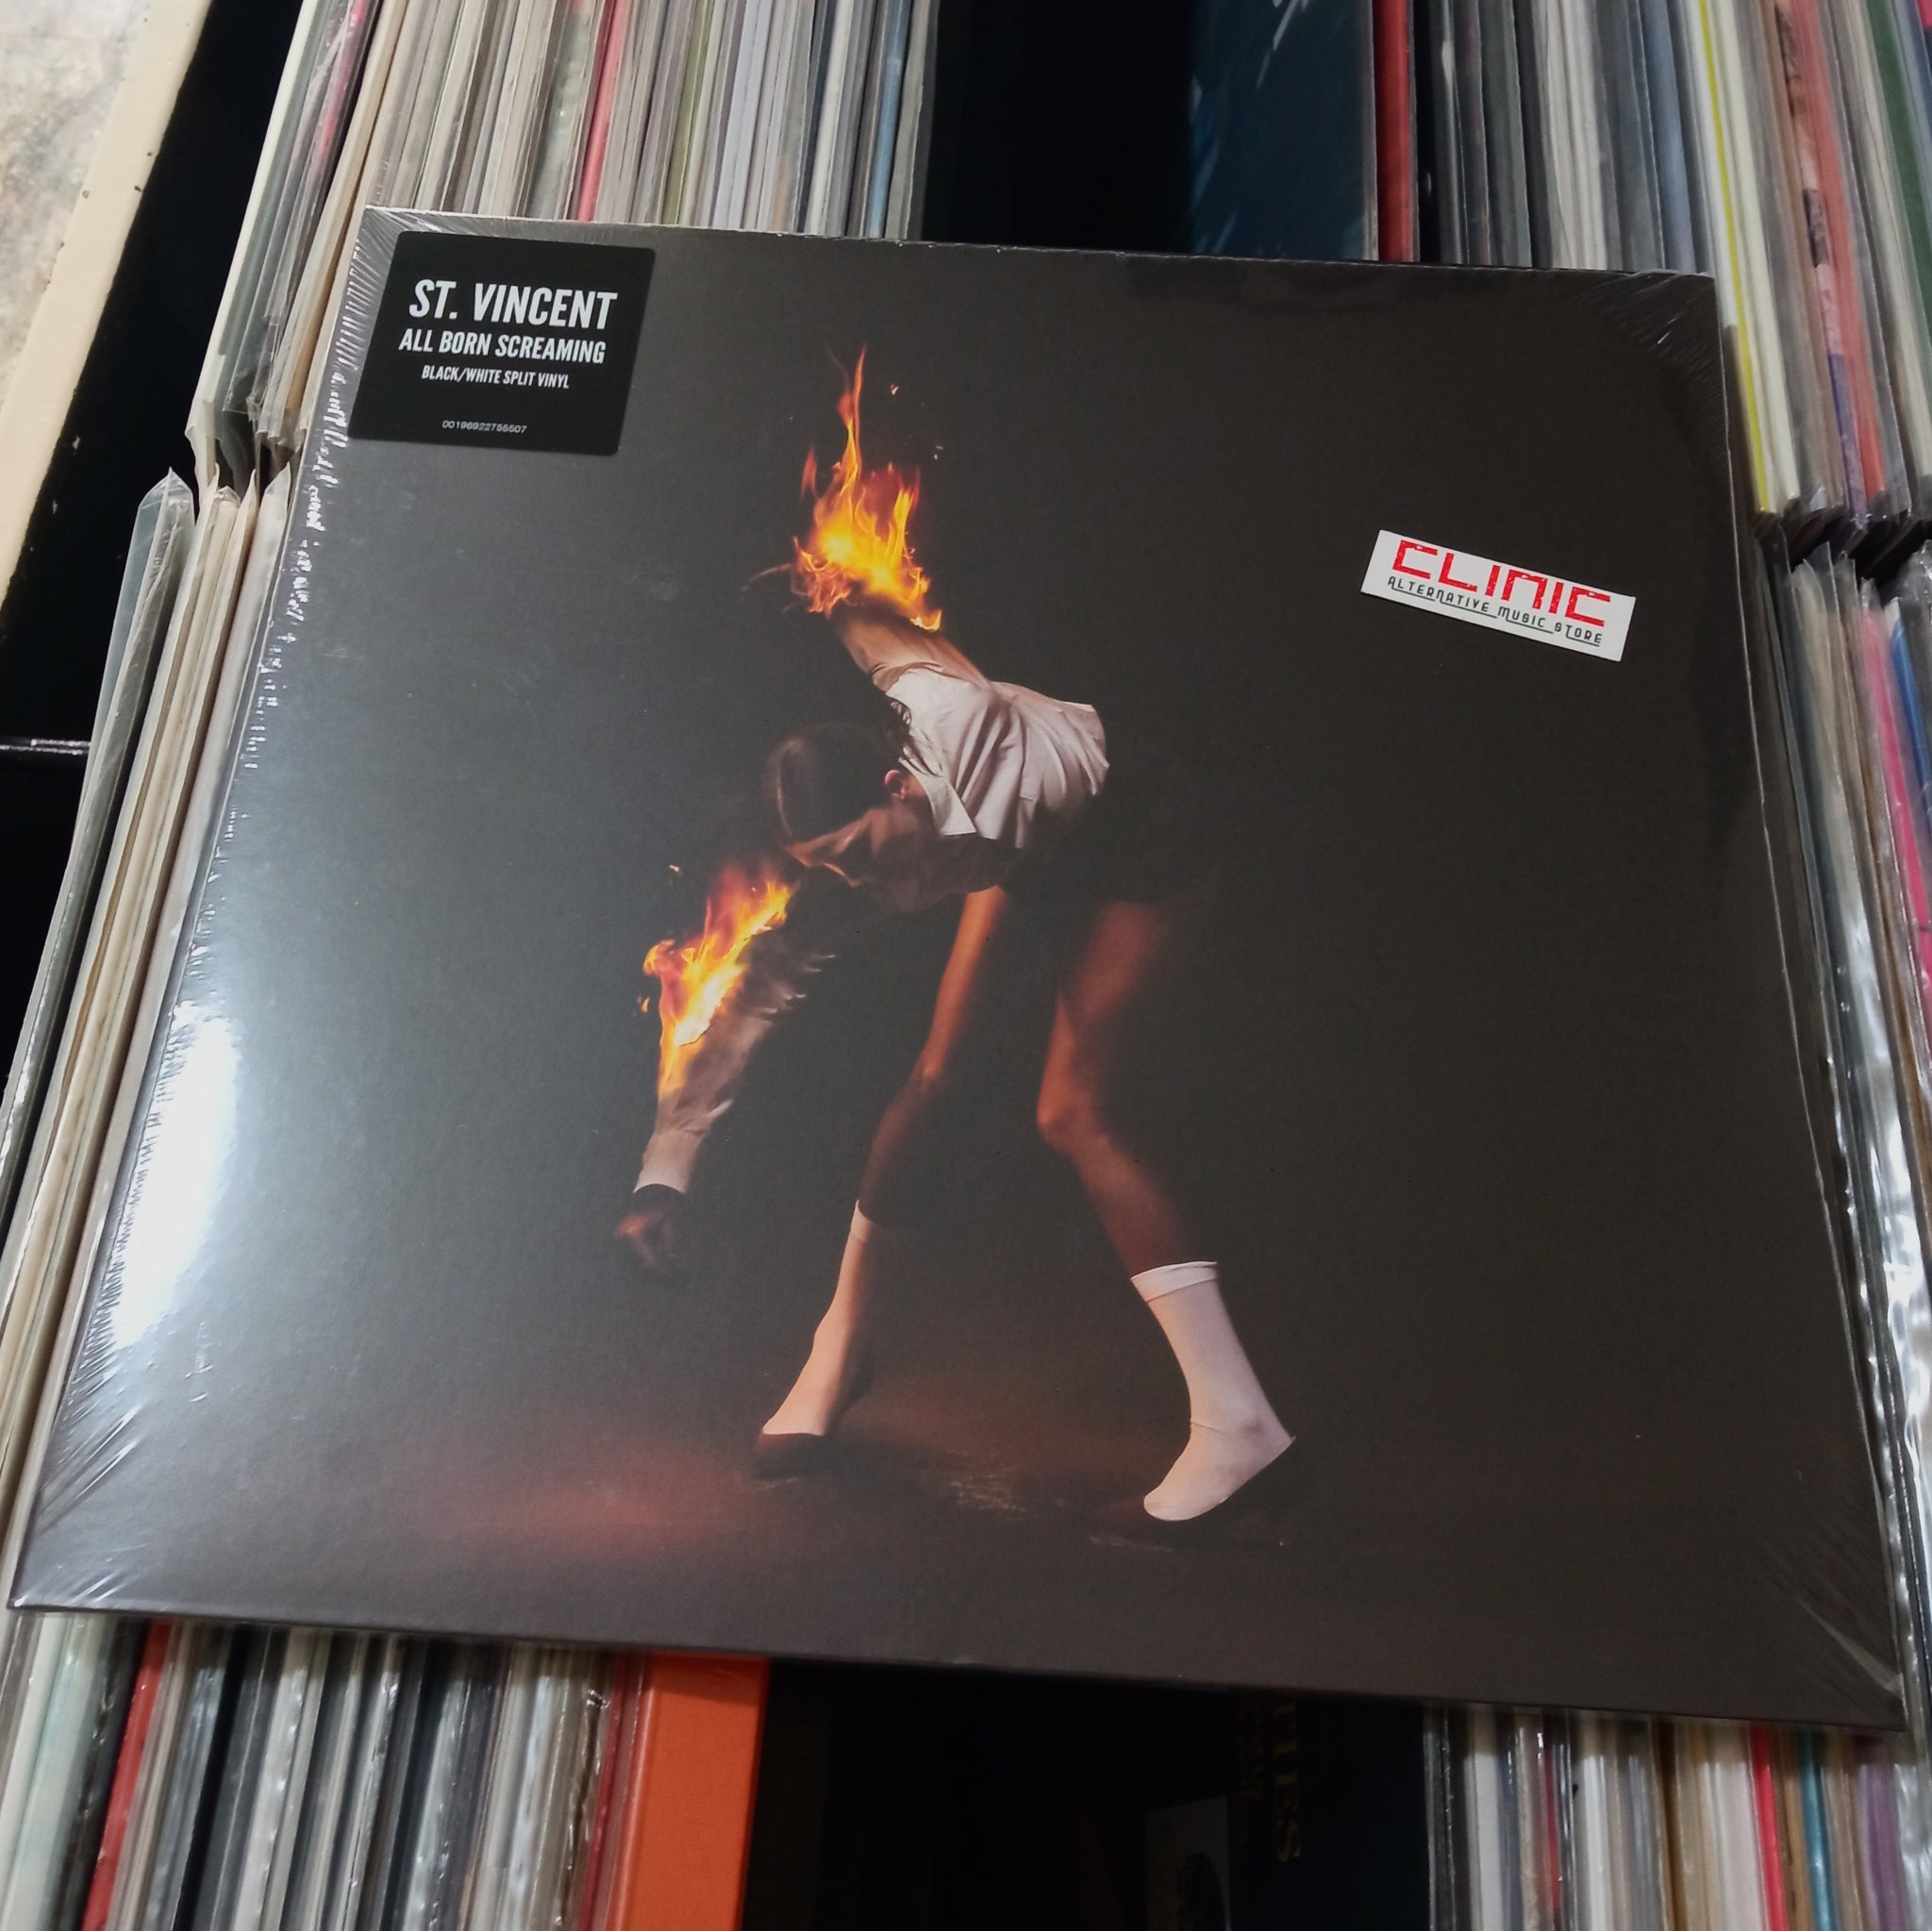 LP - ST. VINCENT - ALL BORN SCREAMING (Indie Exclusive)